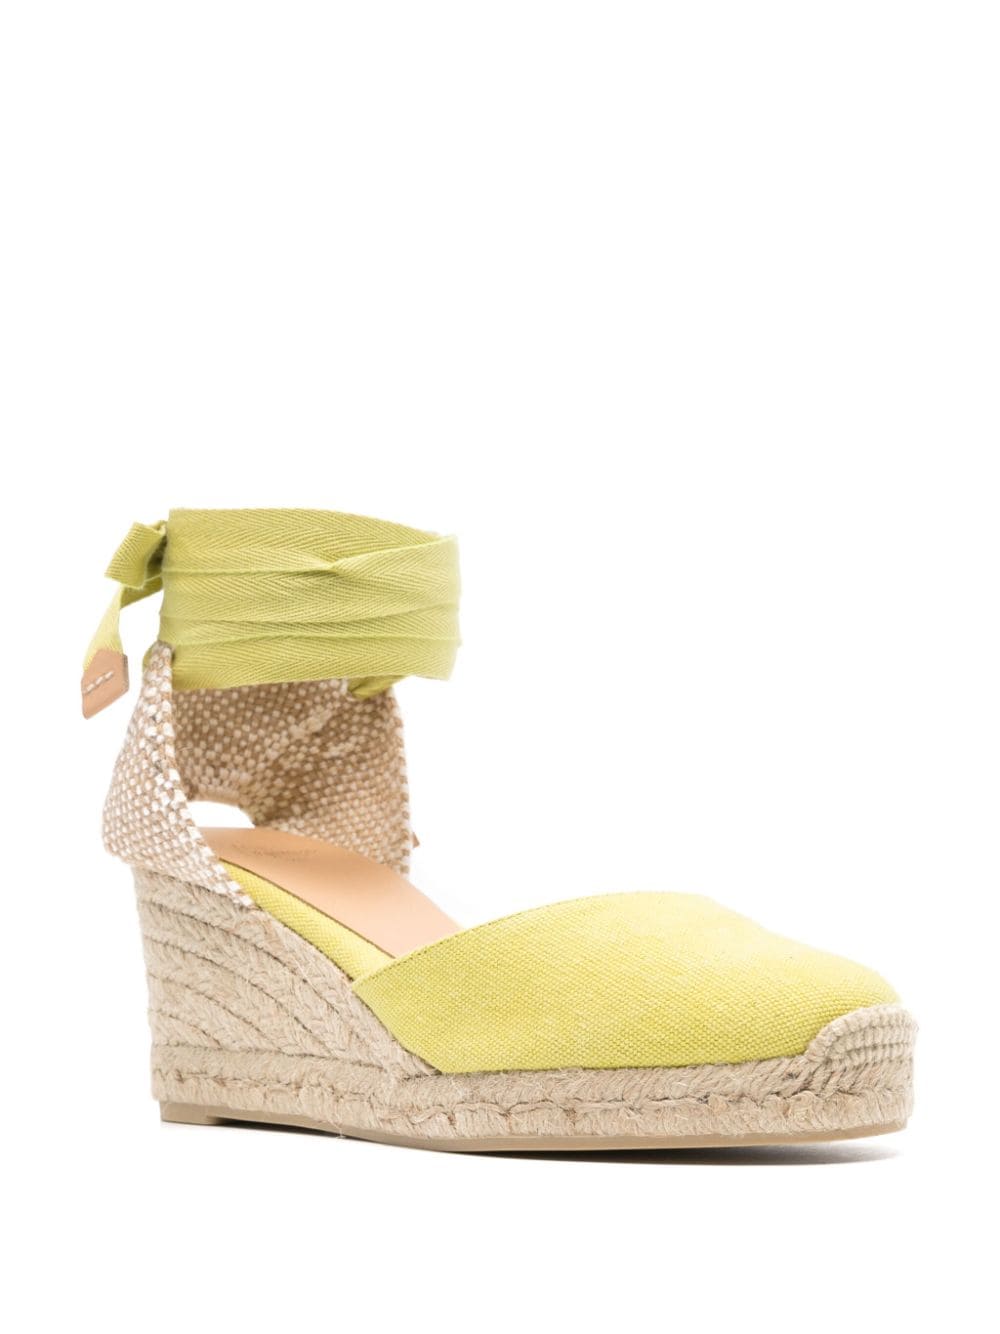 Castaner Flat Shoes Yellow